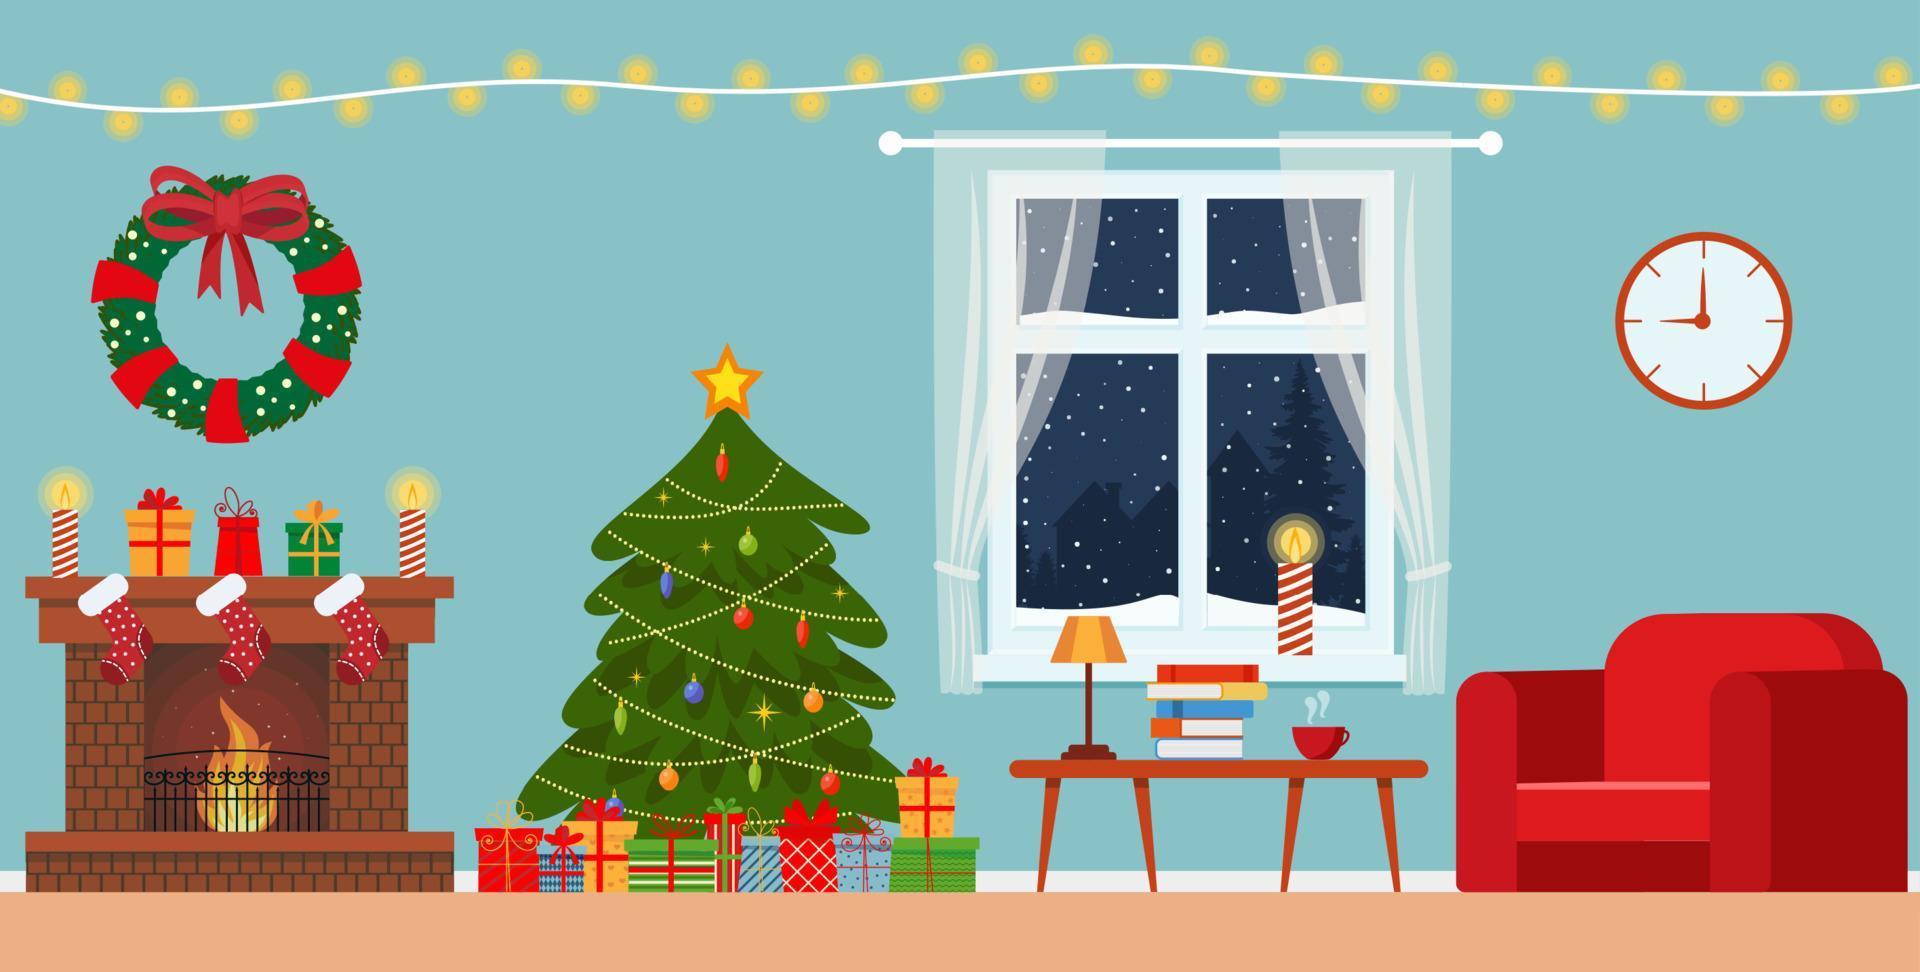 Cozy living interior Christmas with red sofa, gifts, and tree. Vector flat style illustration.